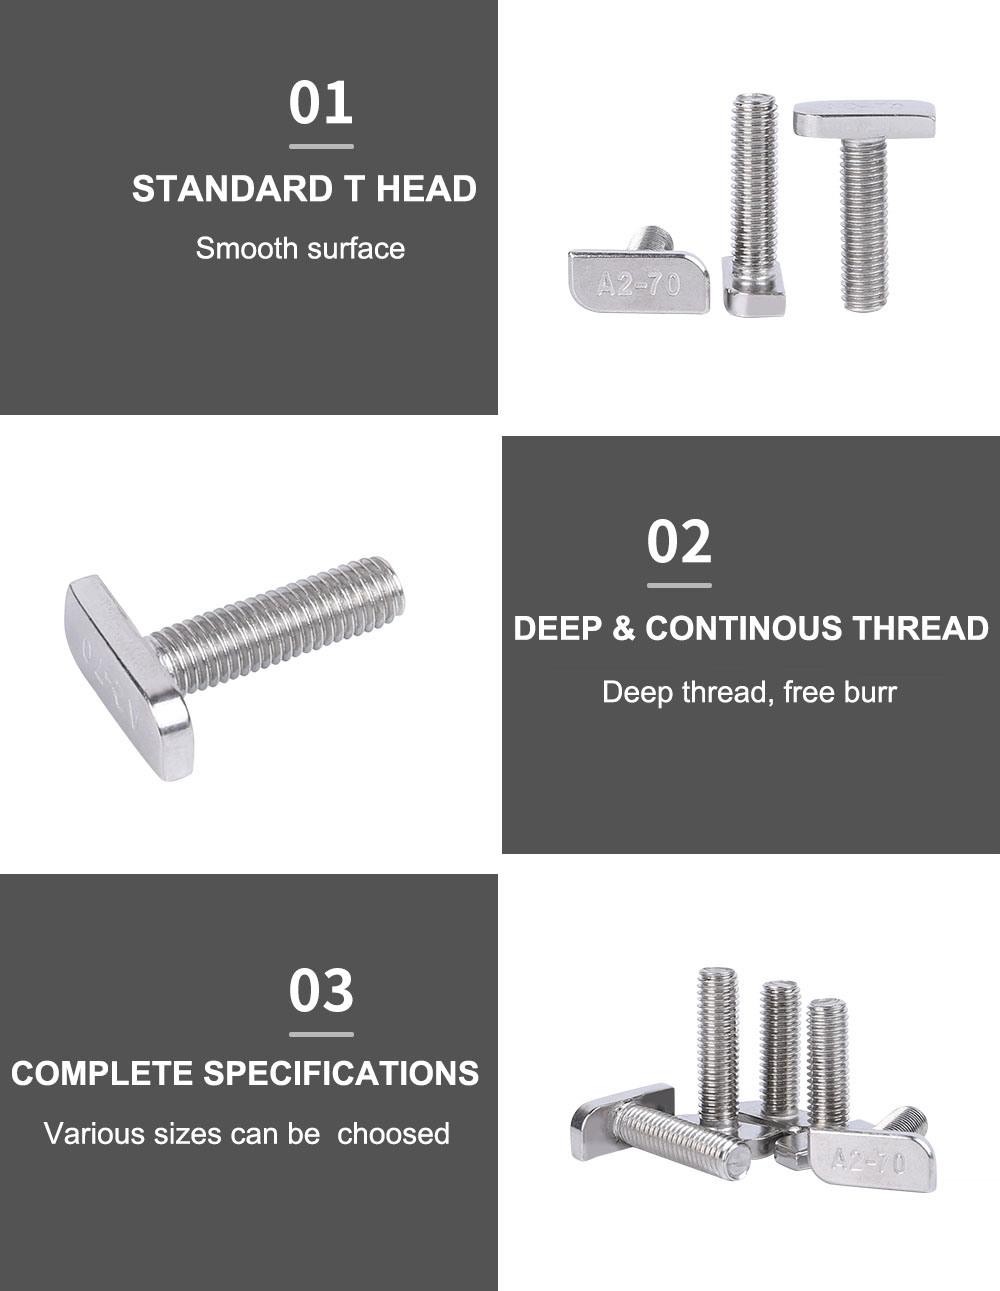 High Tensile Stainless Steel Rail T Bolt M20 T Head Bolt T Studs Eye Bolt T Bolt (m8*25-40) M8 Stainless Steel &Carbon Steel T Hammer Head T Screw Bolts